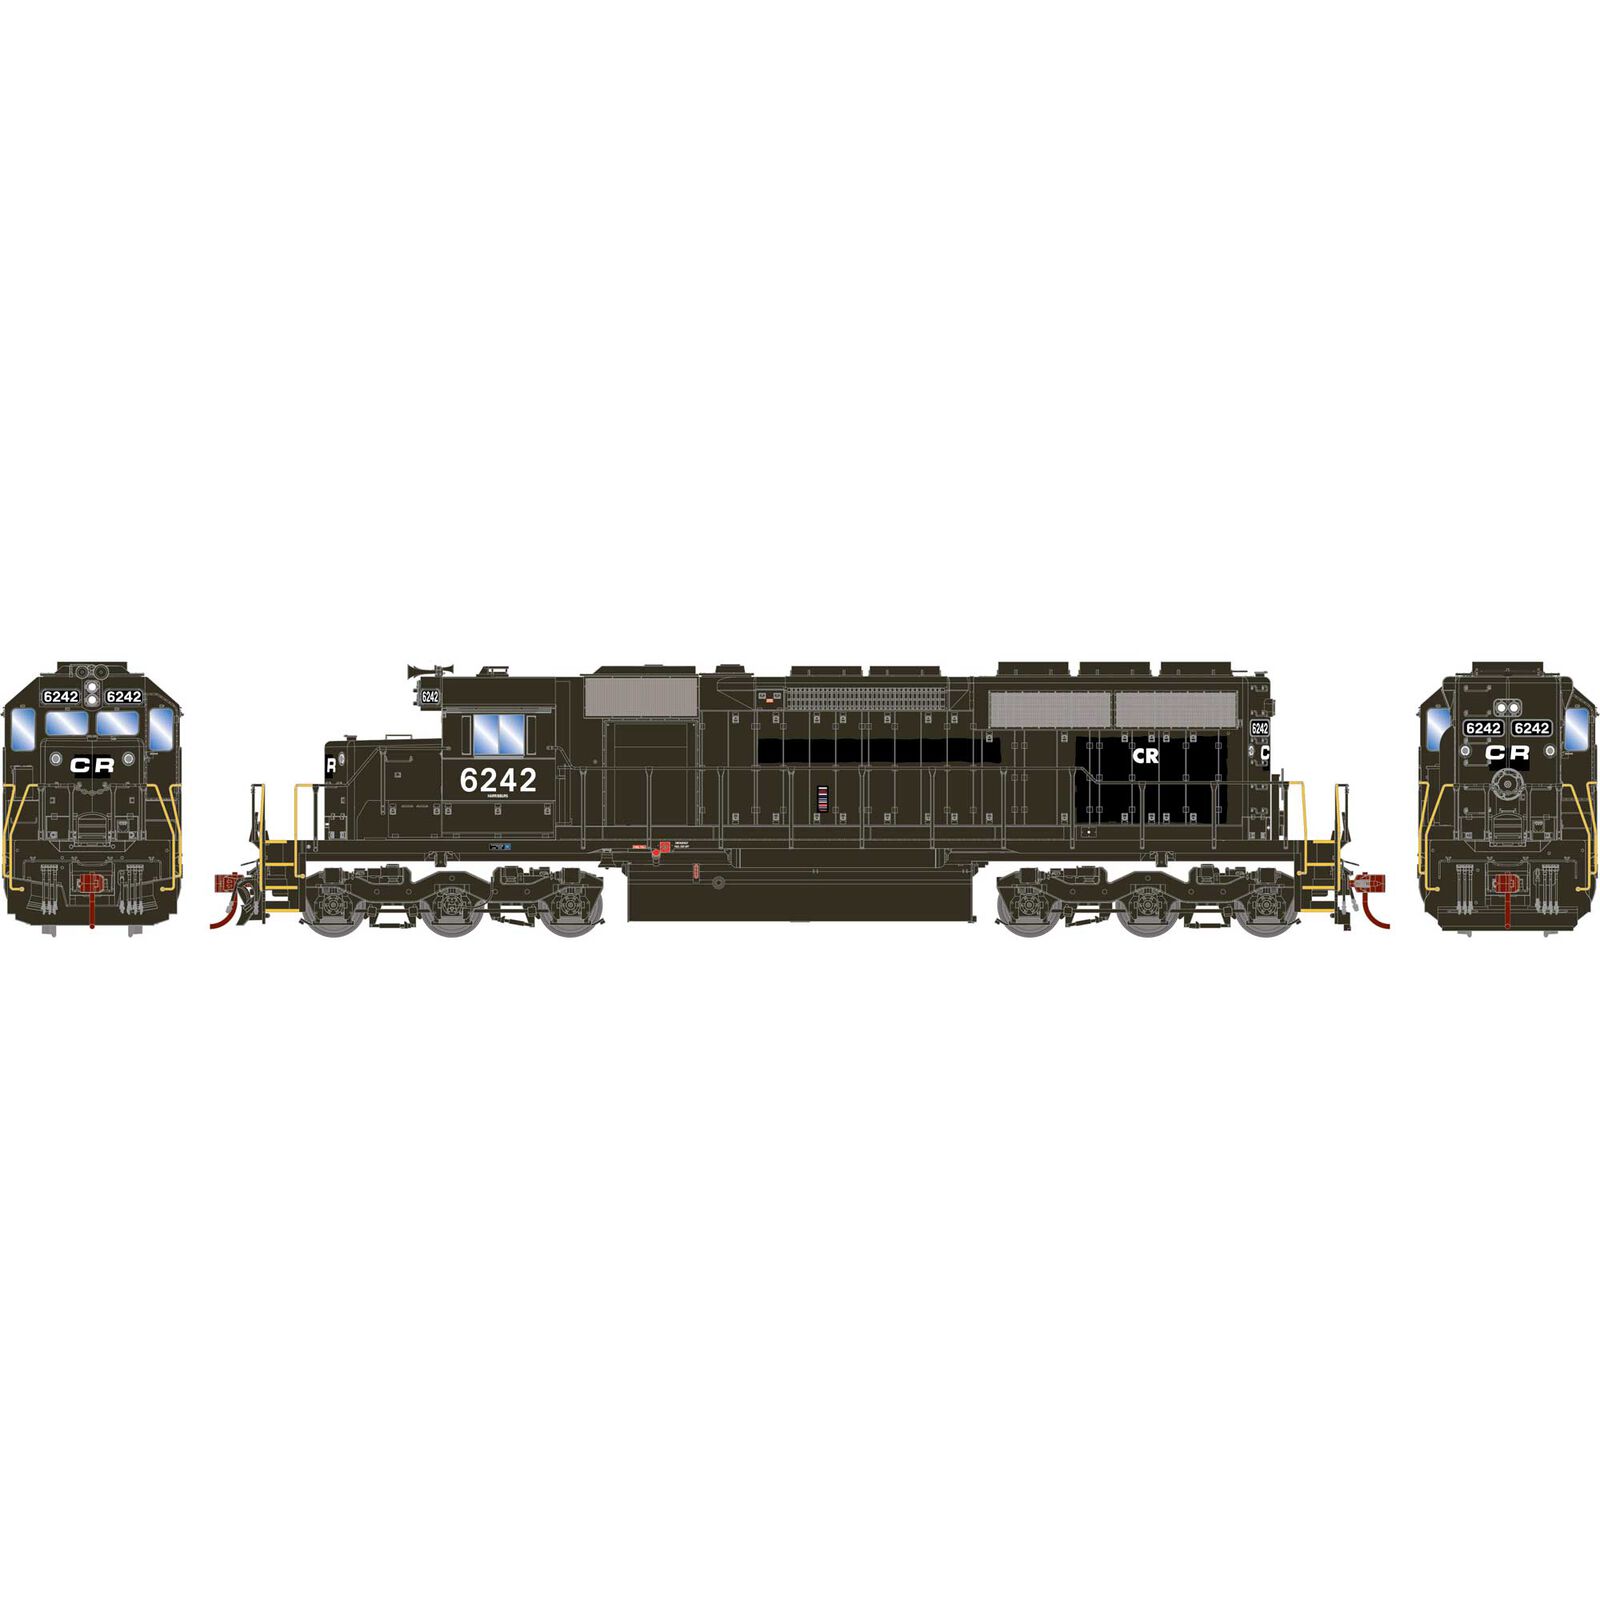 HO SD40 Locomotive, CR / PC Patched #6242